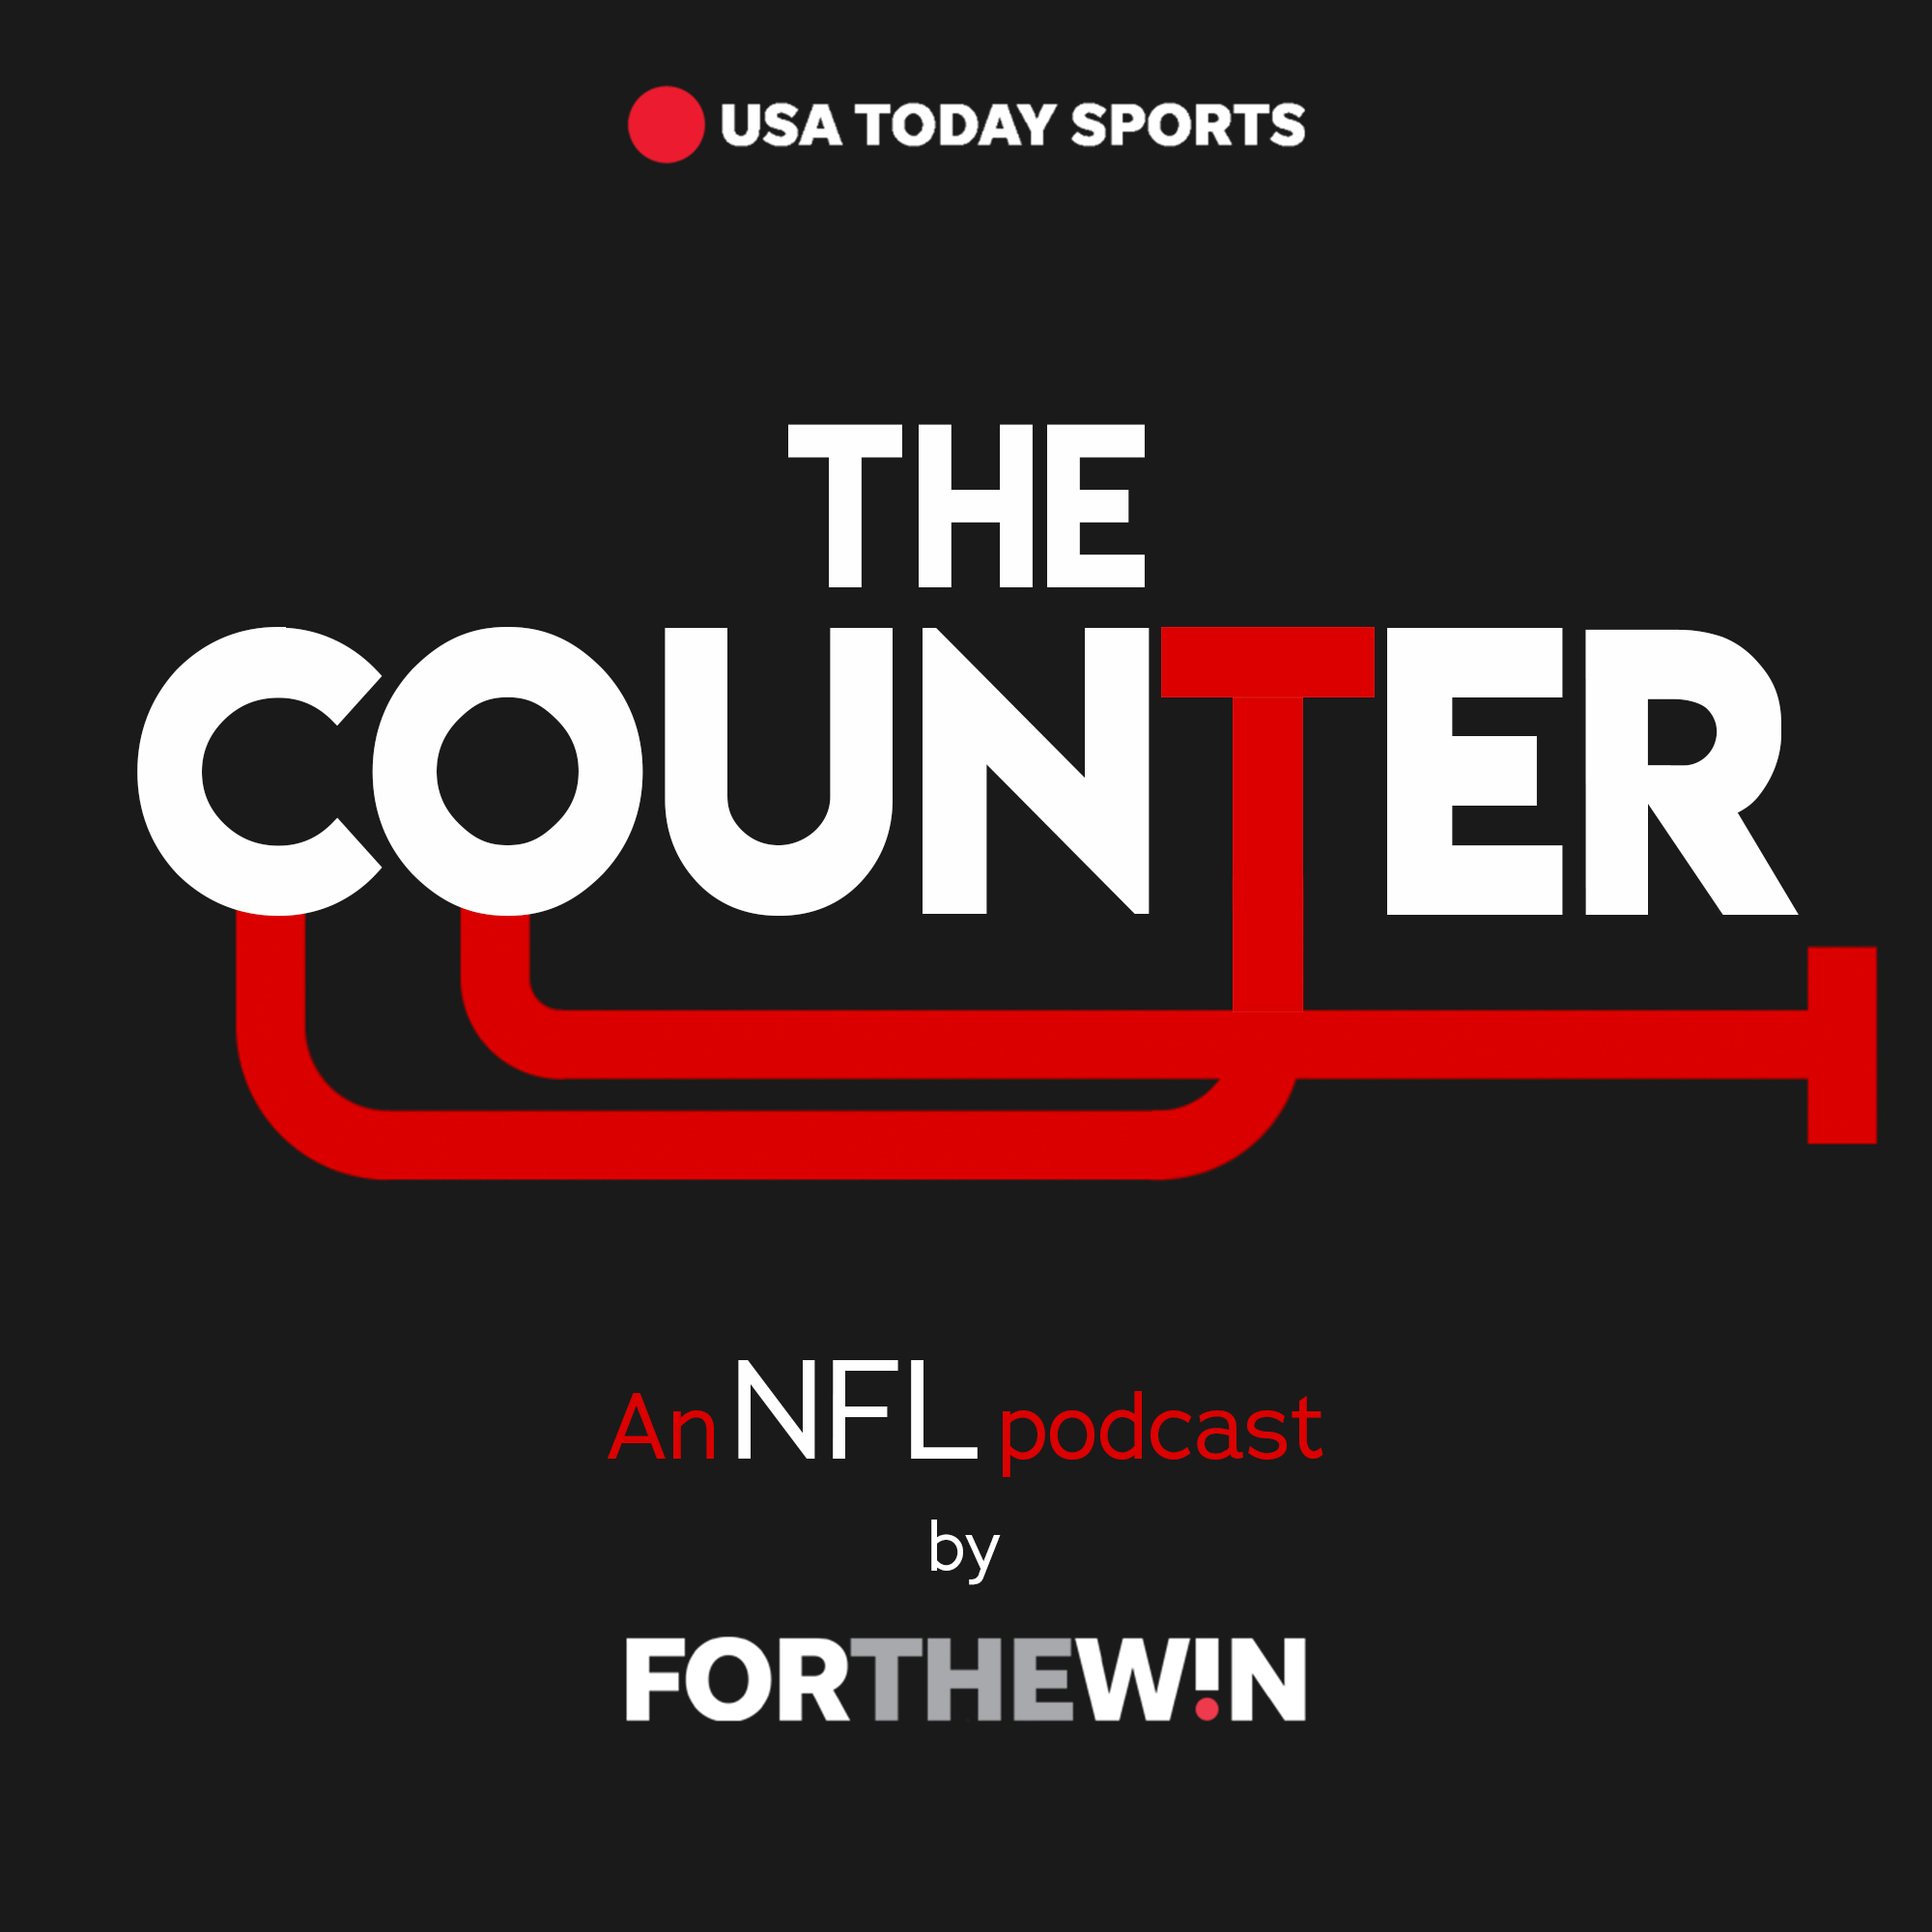 The Counter: An NFL Podcast by For The Win - Pro Football Focus' Seth Galina joins Steven Ruiz